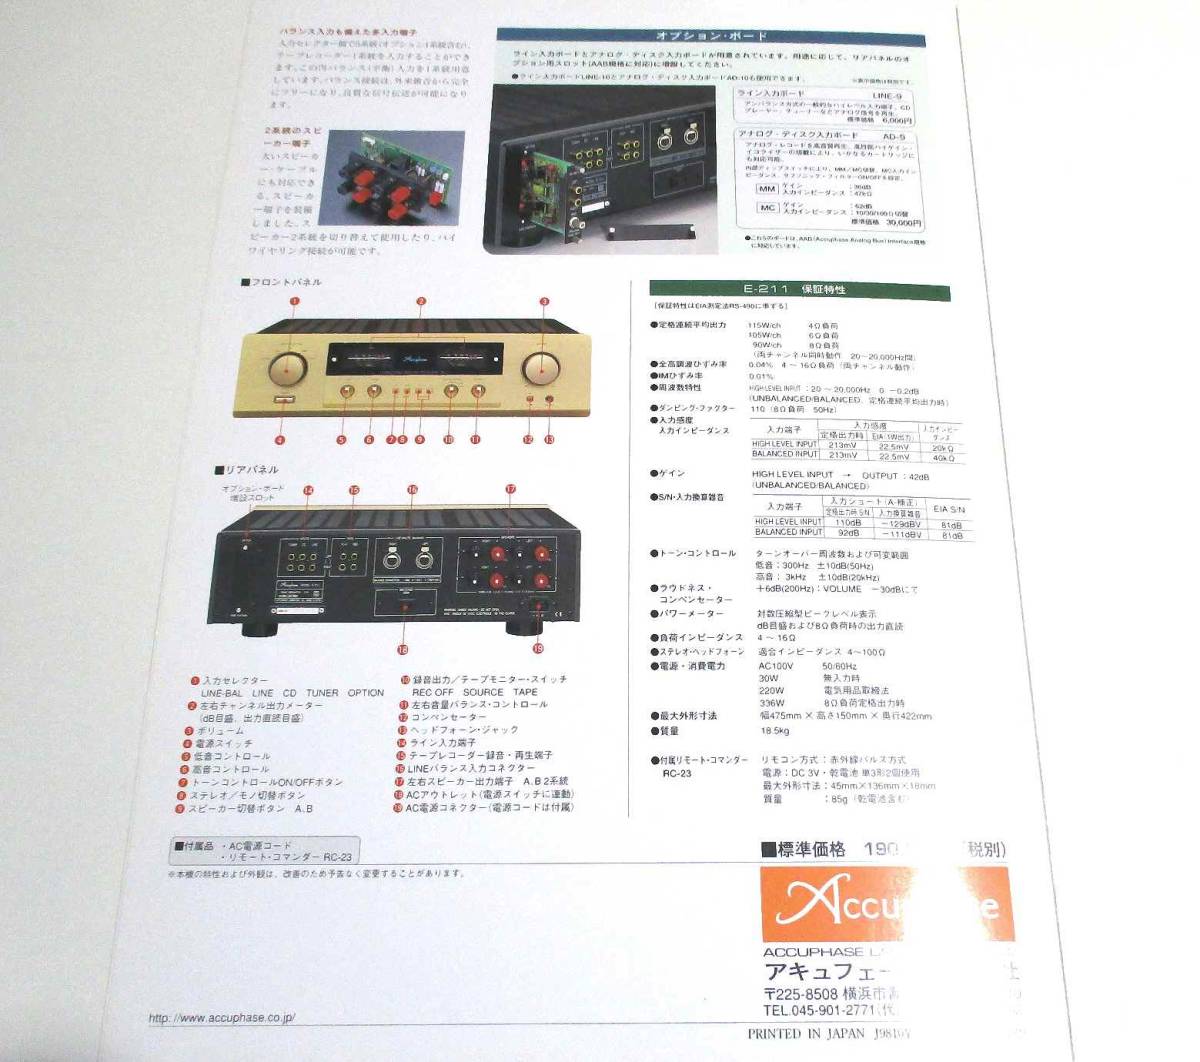 * Accuphase E-211 < single goods catalog > 1998 year version 